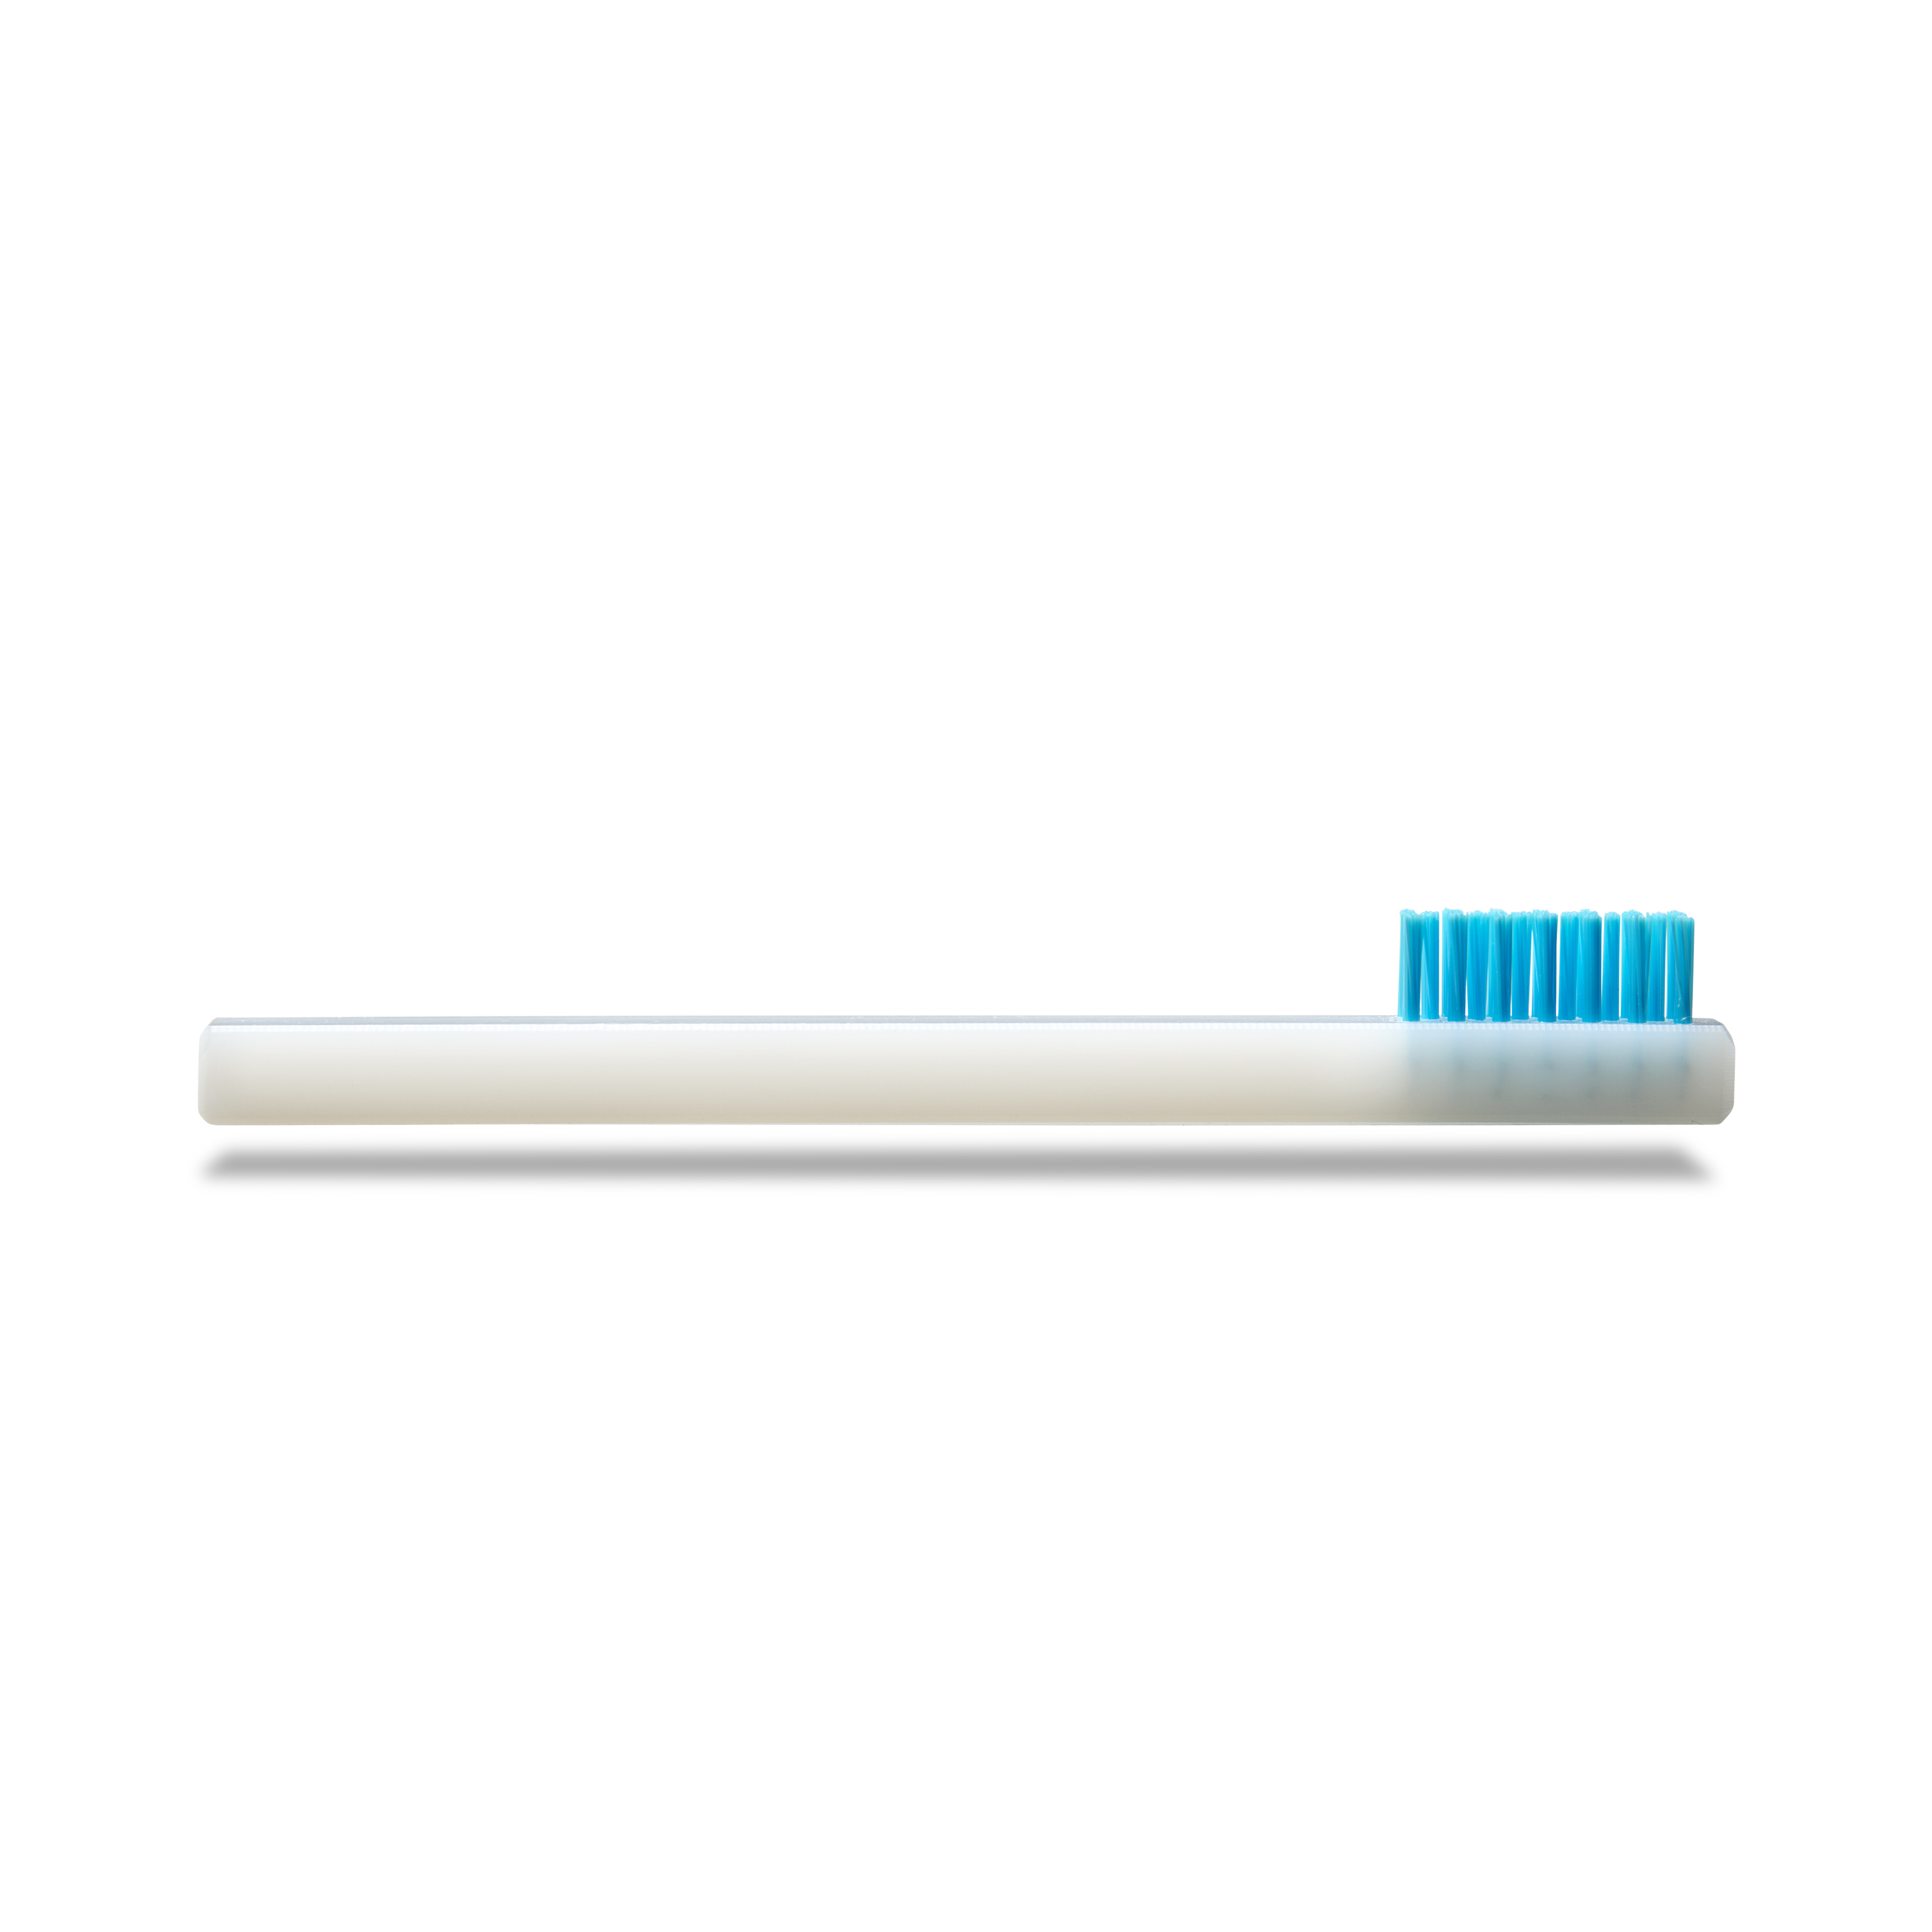 Small blue cleaning brush Image